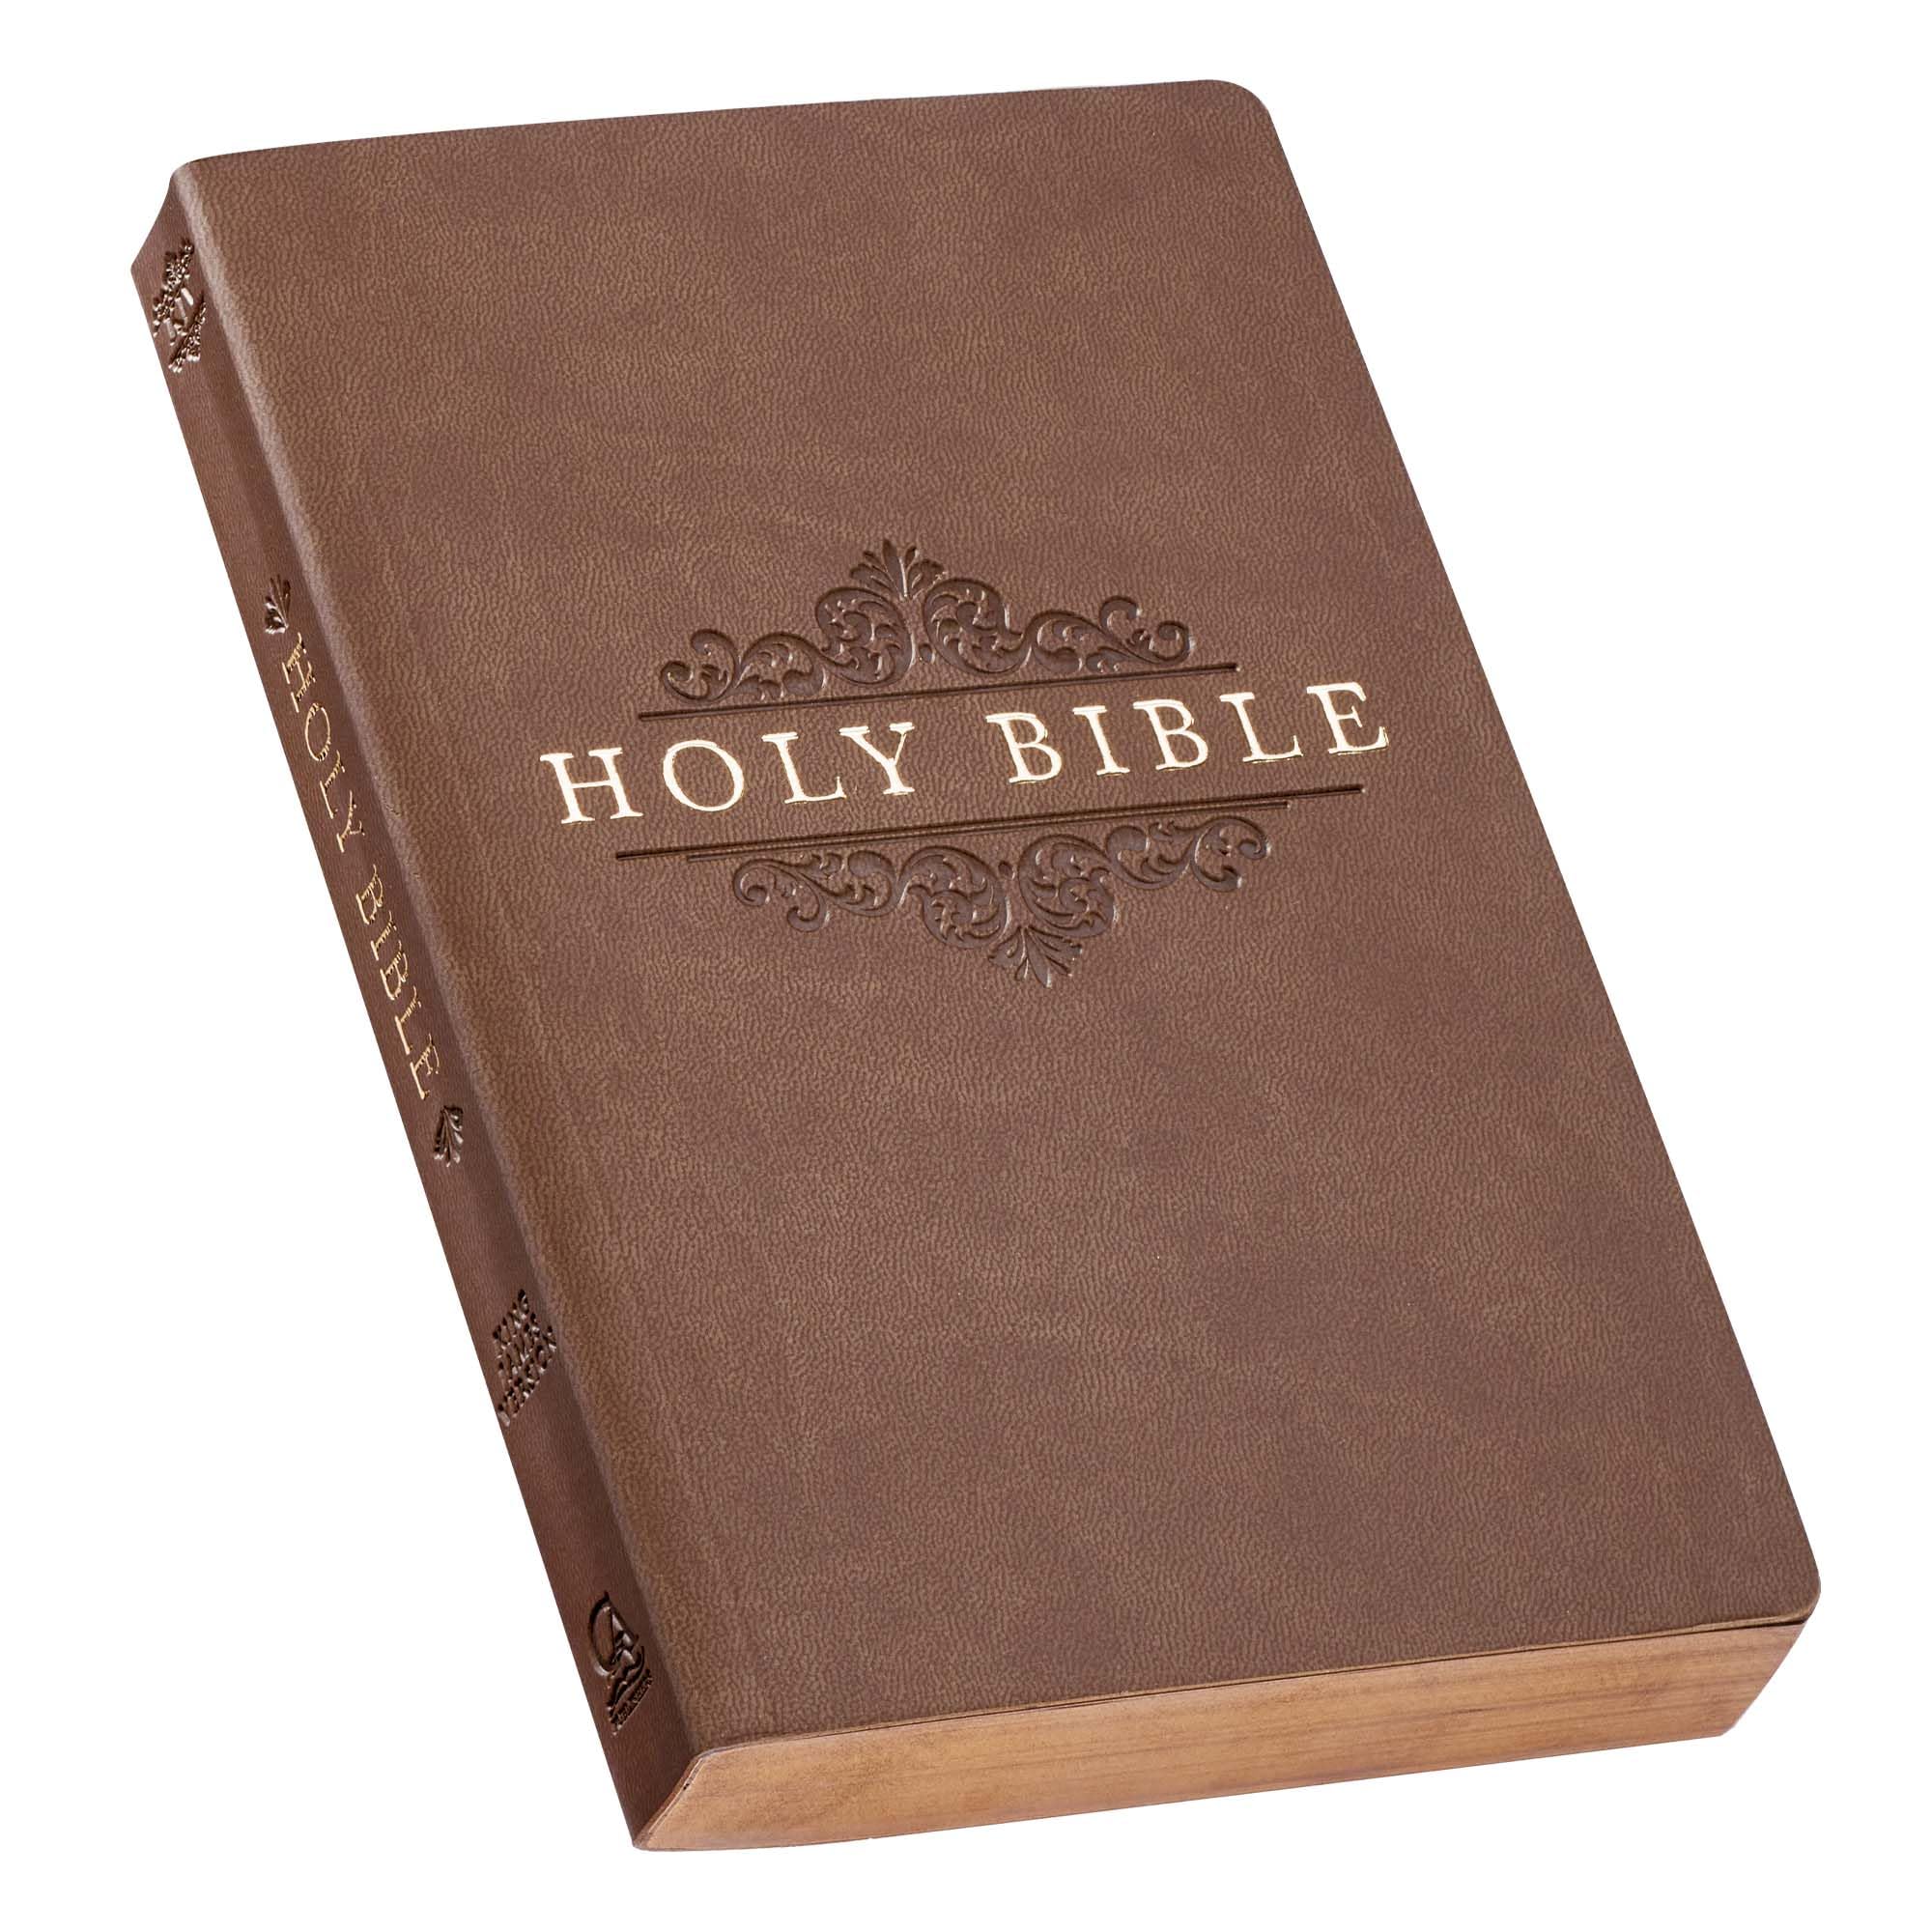 KJV Holy Bible, Gift and Award Bible Faux Leather Softcover, King James Version, Tan